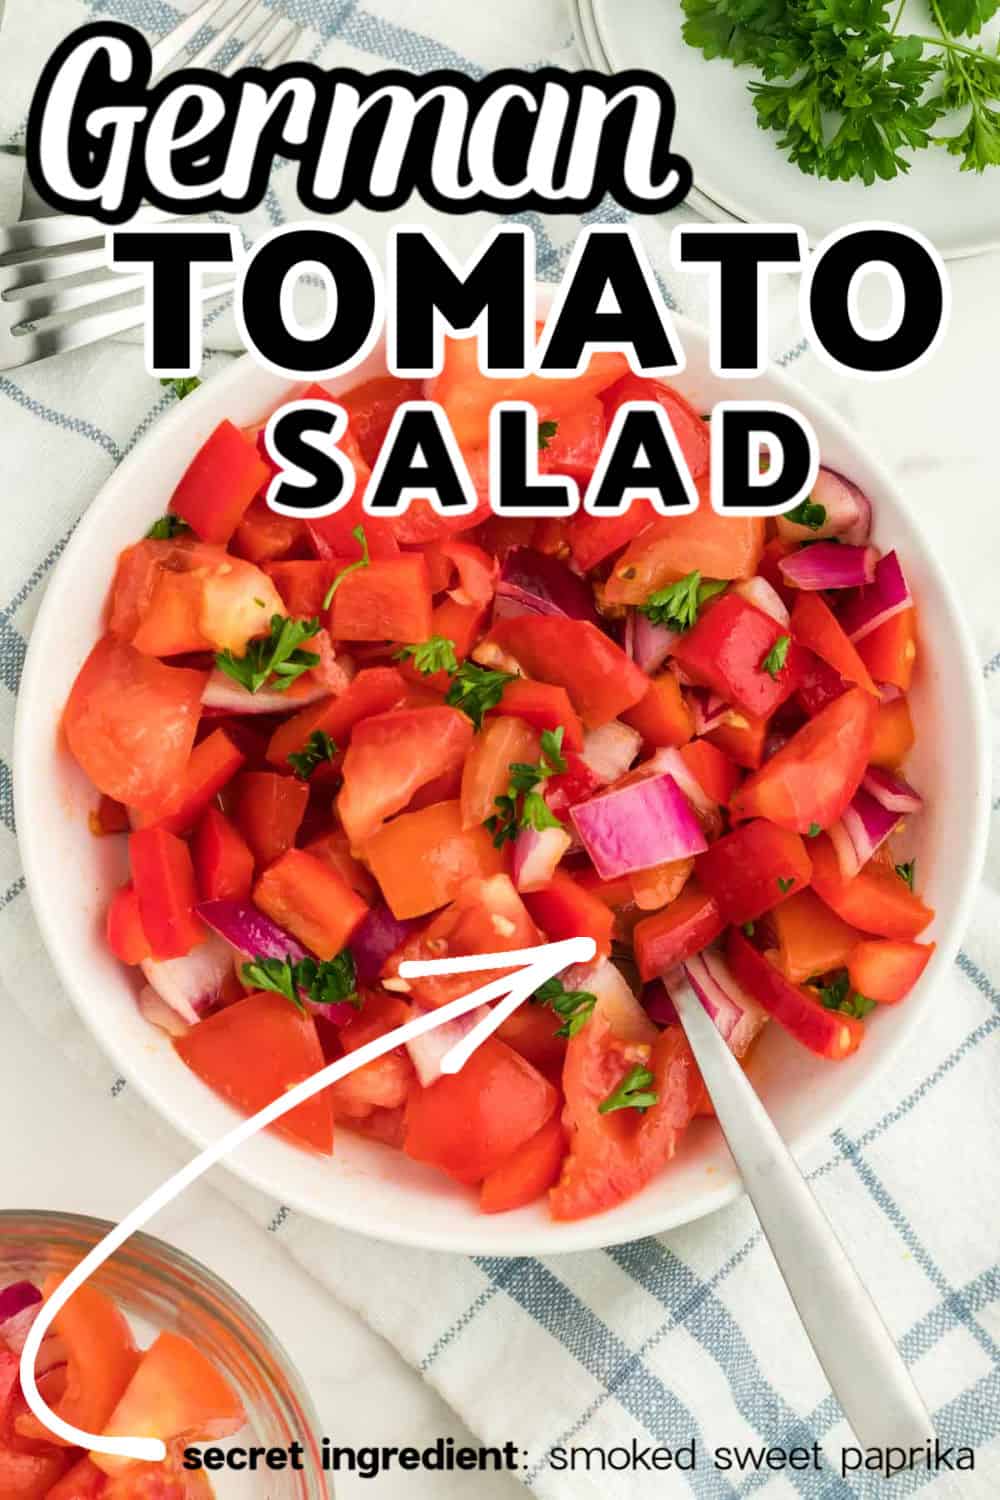 This juicy, and refreshing is made with fresh tomatoes, crunchy bell peppers and onions. It's tossed in delicious sweet, tangy, and smokey dressing. Perfect for summer cookouts or as a simple side dish. #cheerfulcook #tomatosalad #salad #summer #Germanfood  via @cheerfulcook